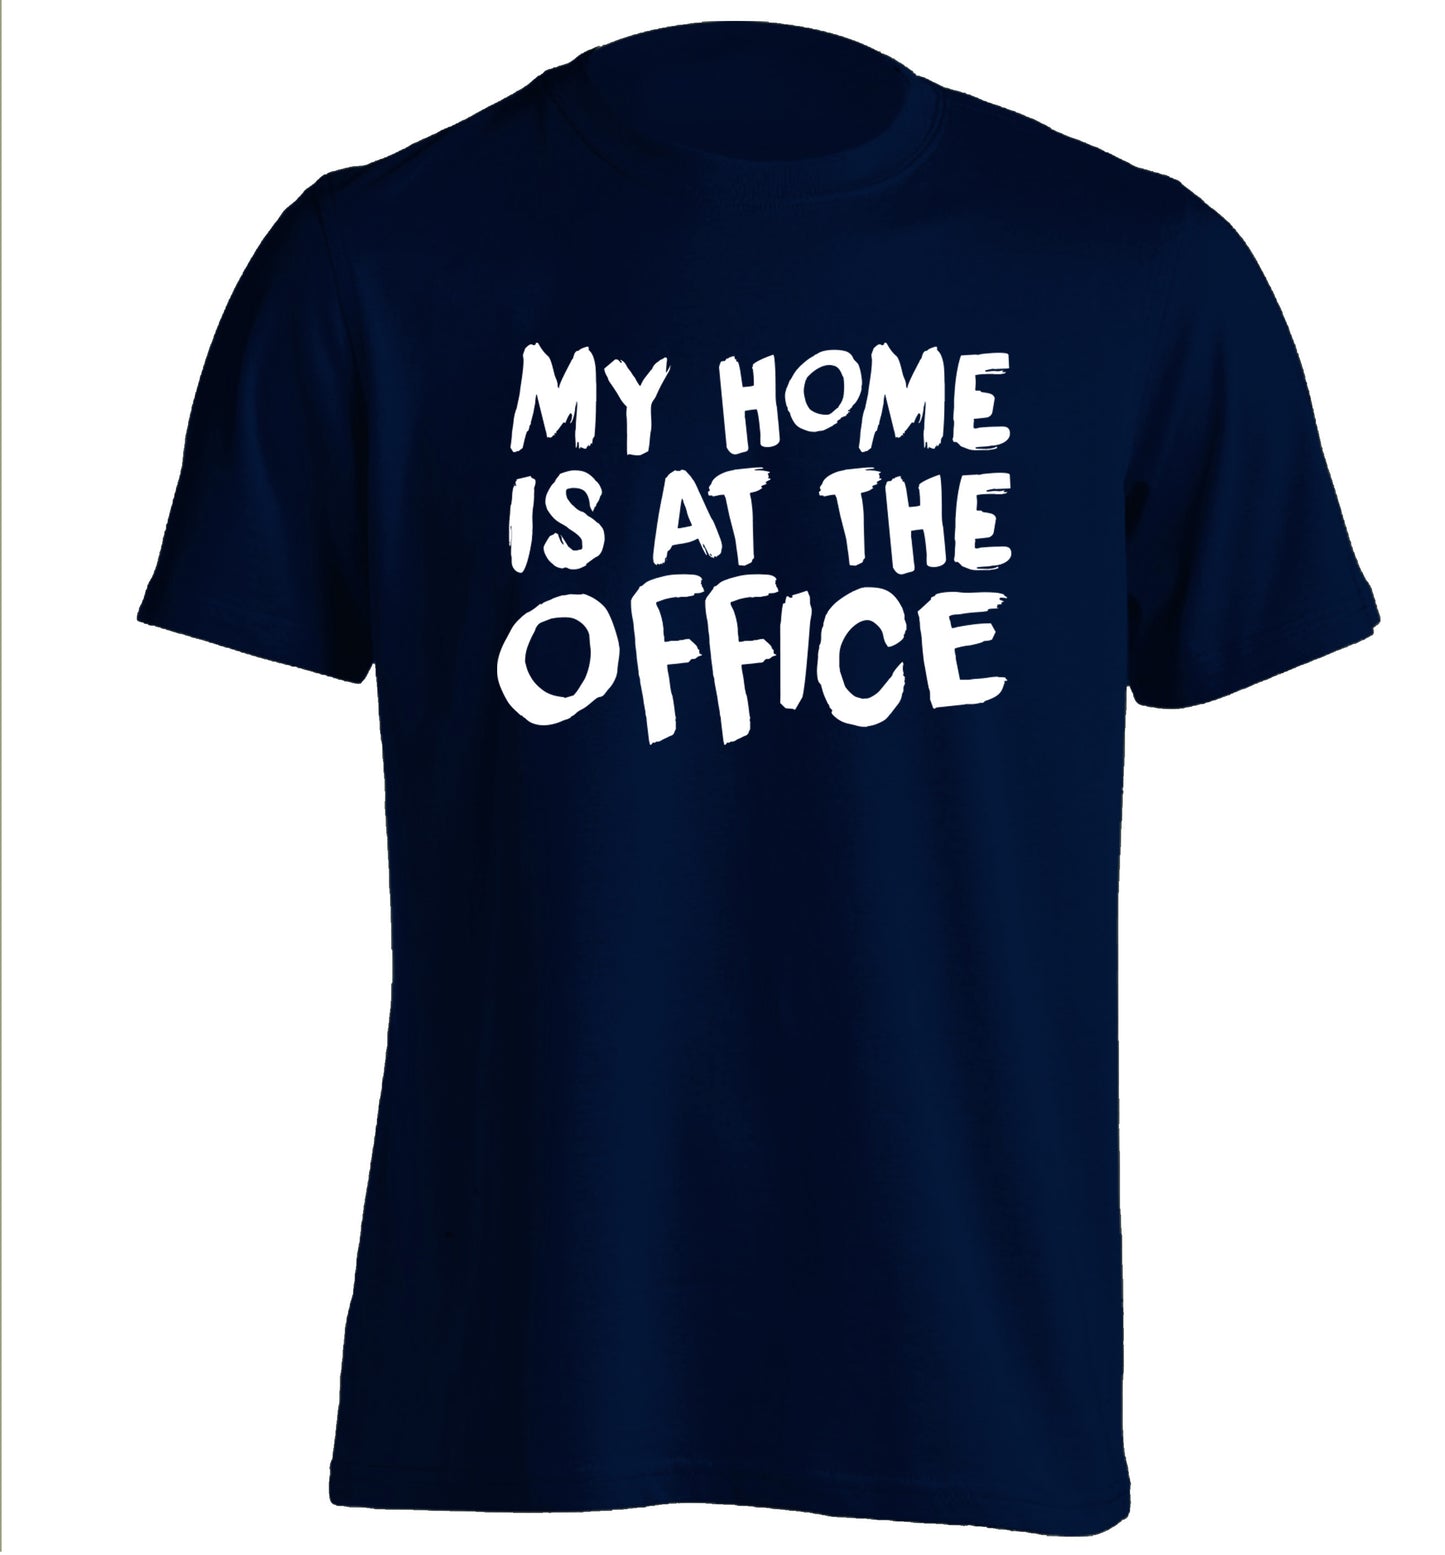 My home is at the office adults unisex navy Tshirt 2XL